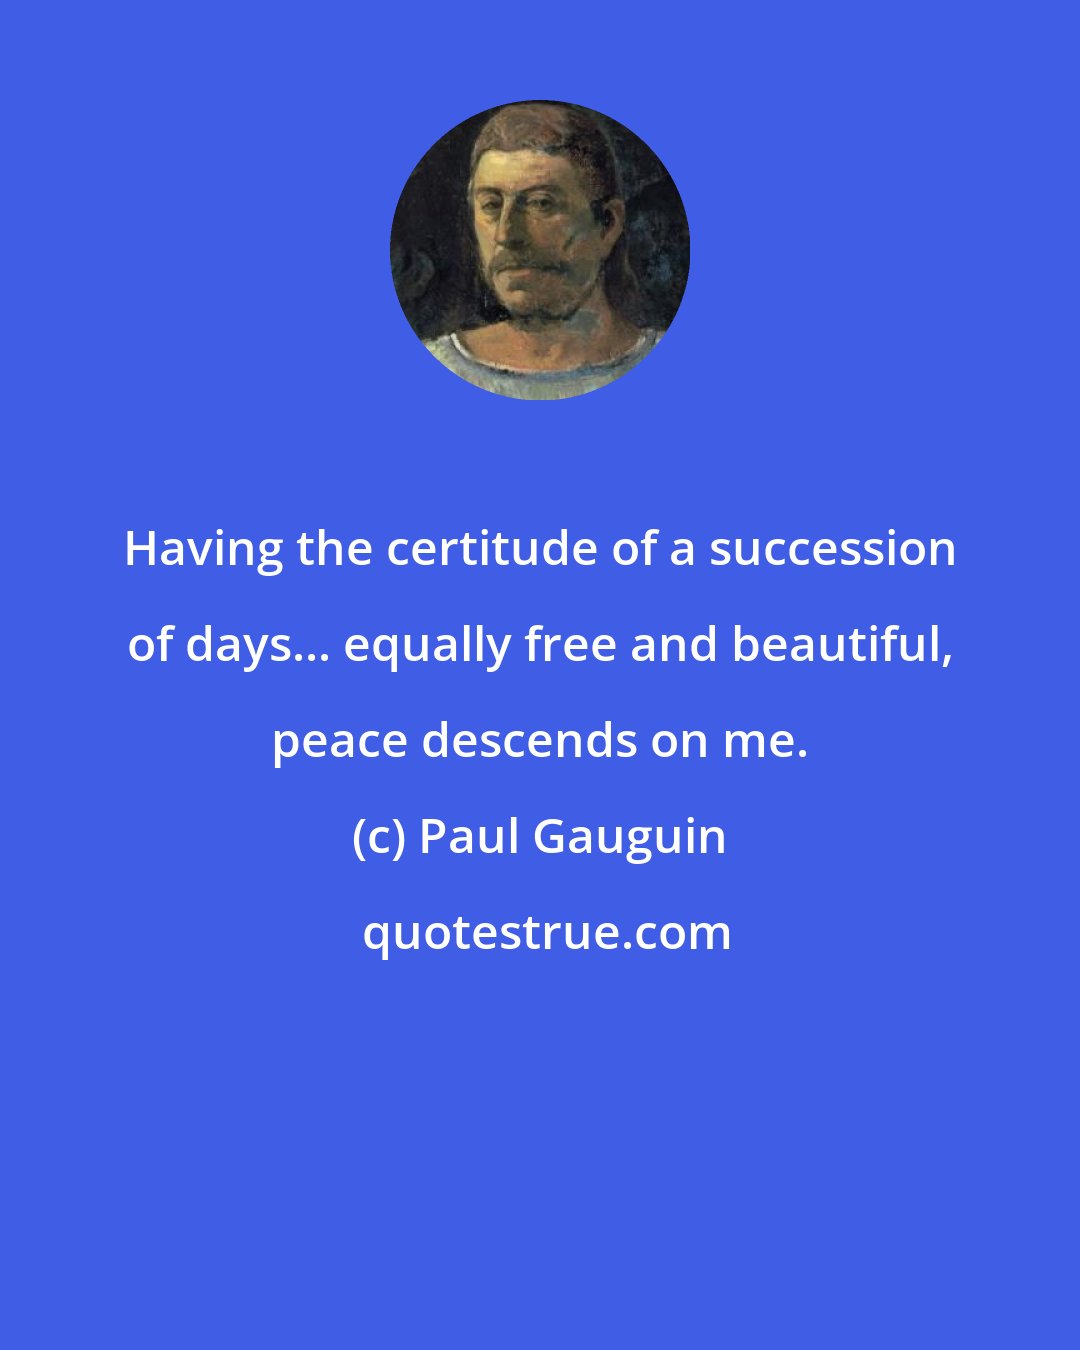 Paul Gauguin: Having the certitude of a succession of days... equally free and beautiful, peace descends on me.